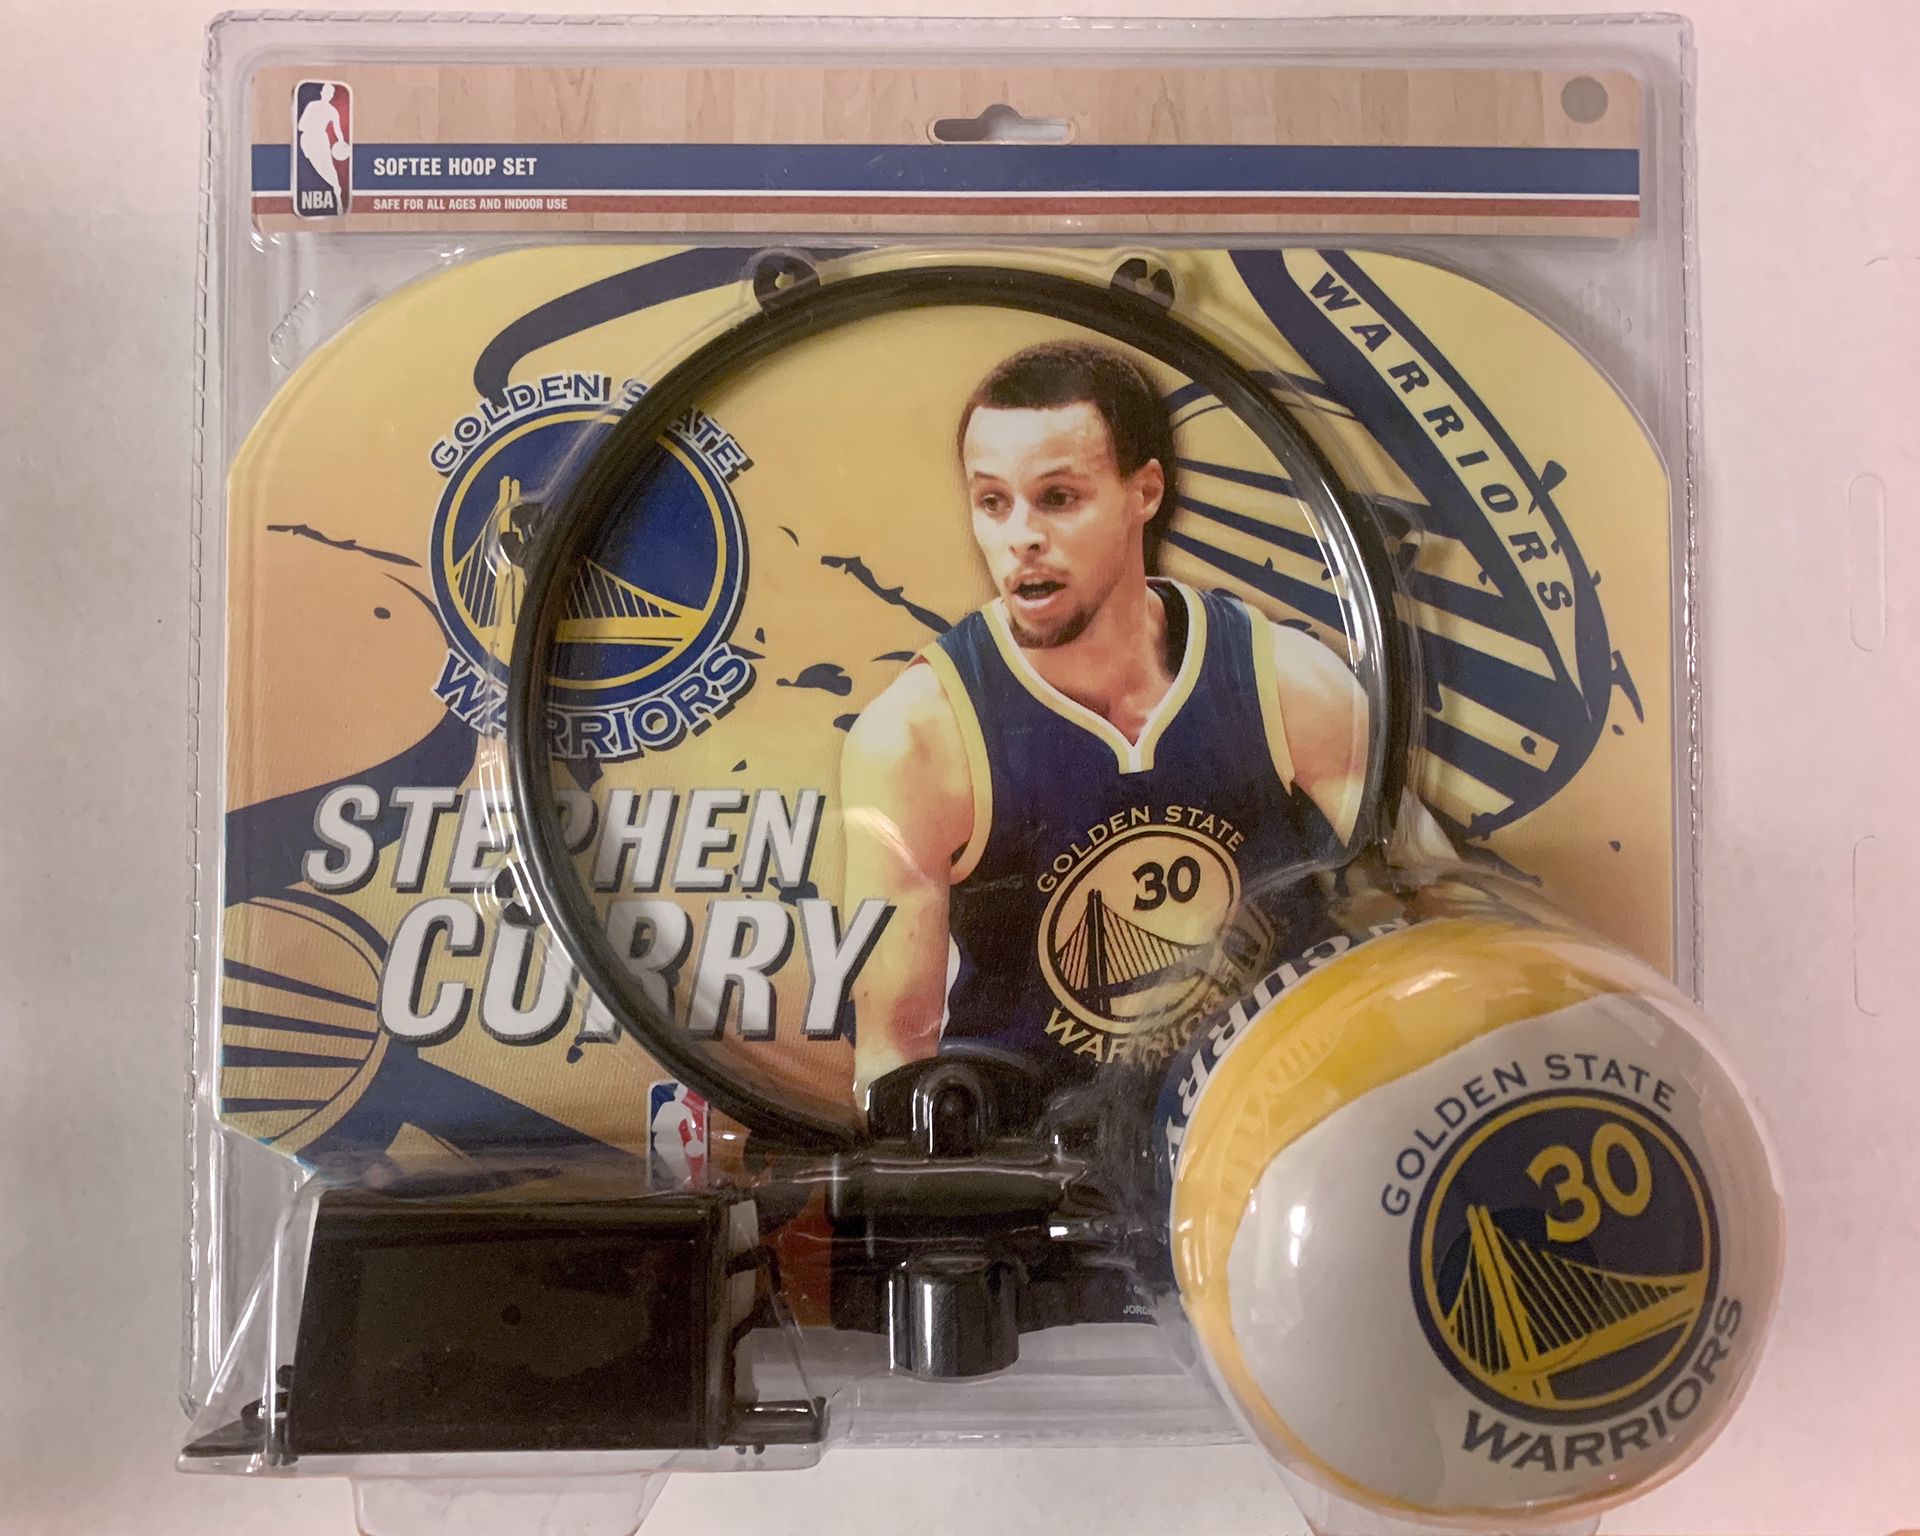 Stephen Curry Softee Hoop Set With Additional Soft 3 Ball Set NEW UNOPENED